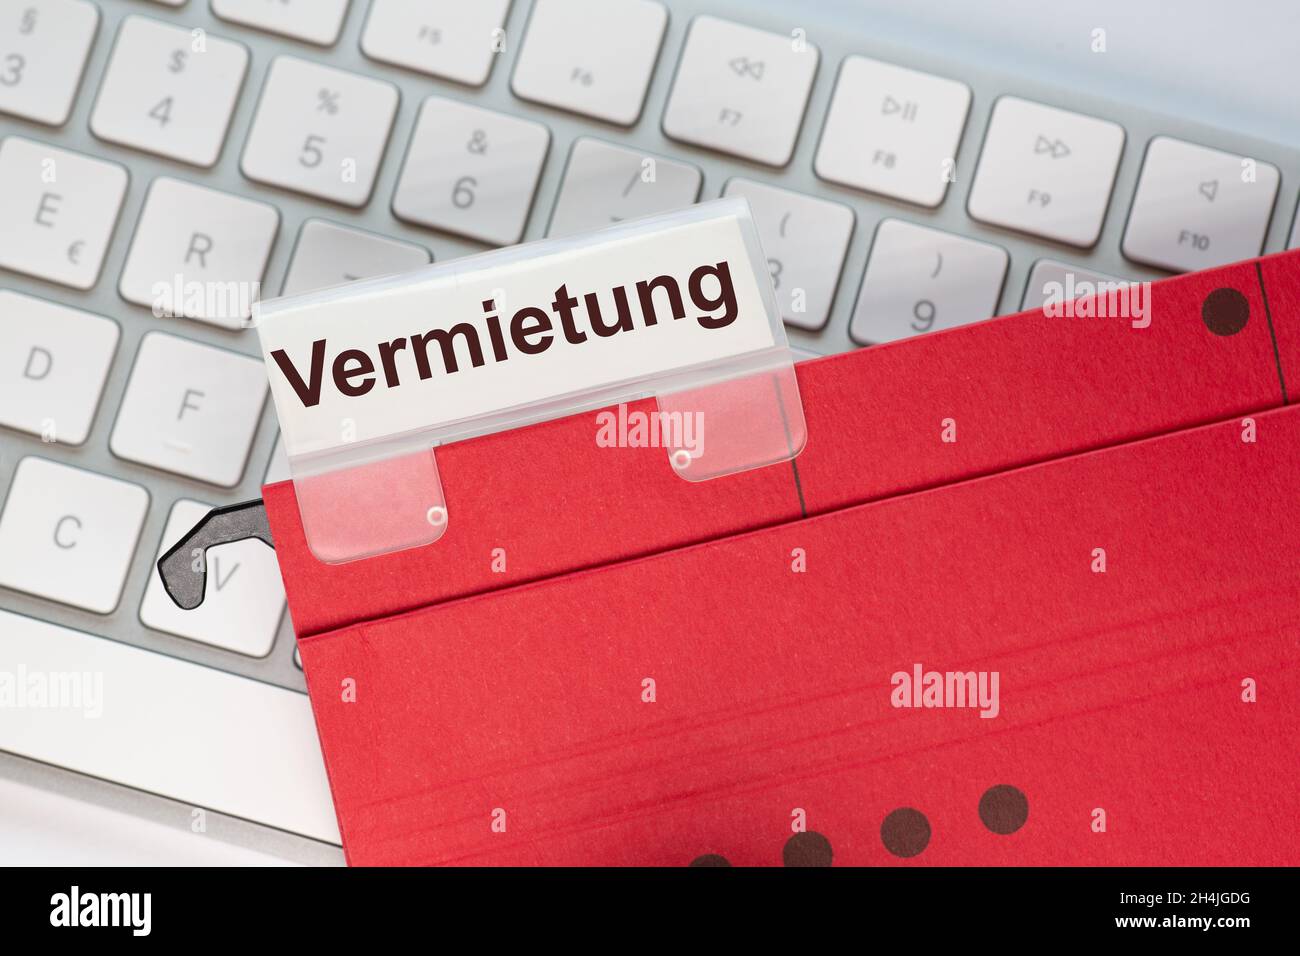 The German word for rental can be seen on the label of a red hanging folder. The hanging folder is on a computer keyboard. Stock Photo